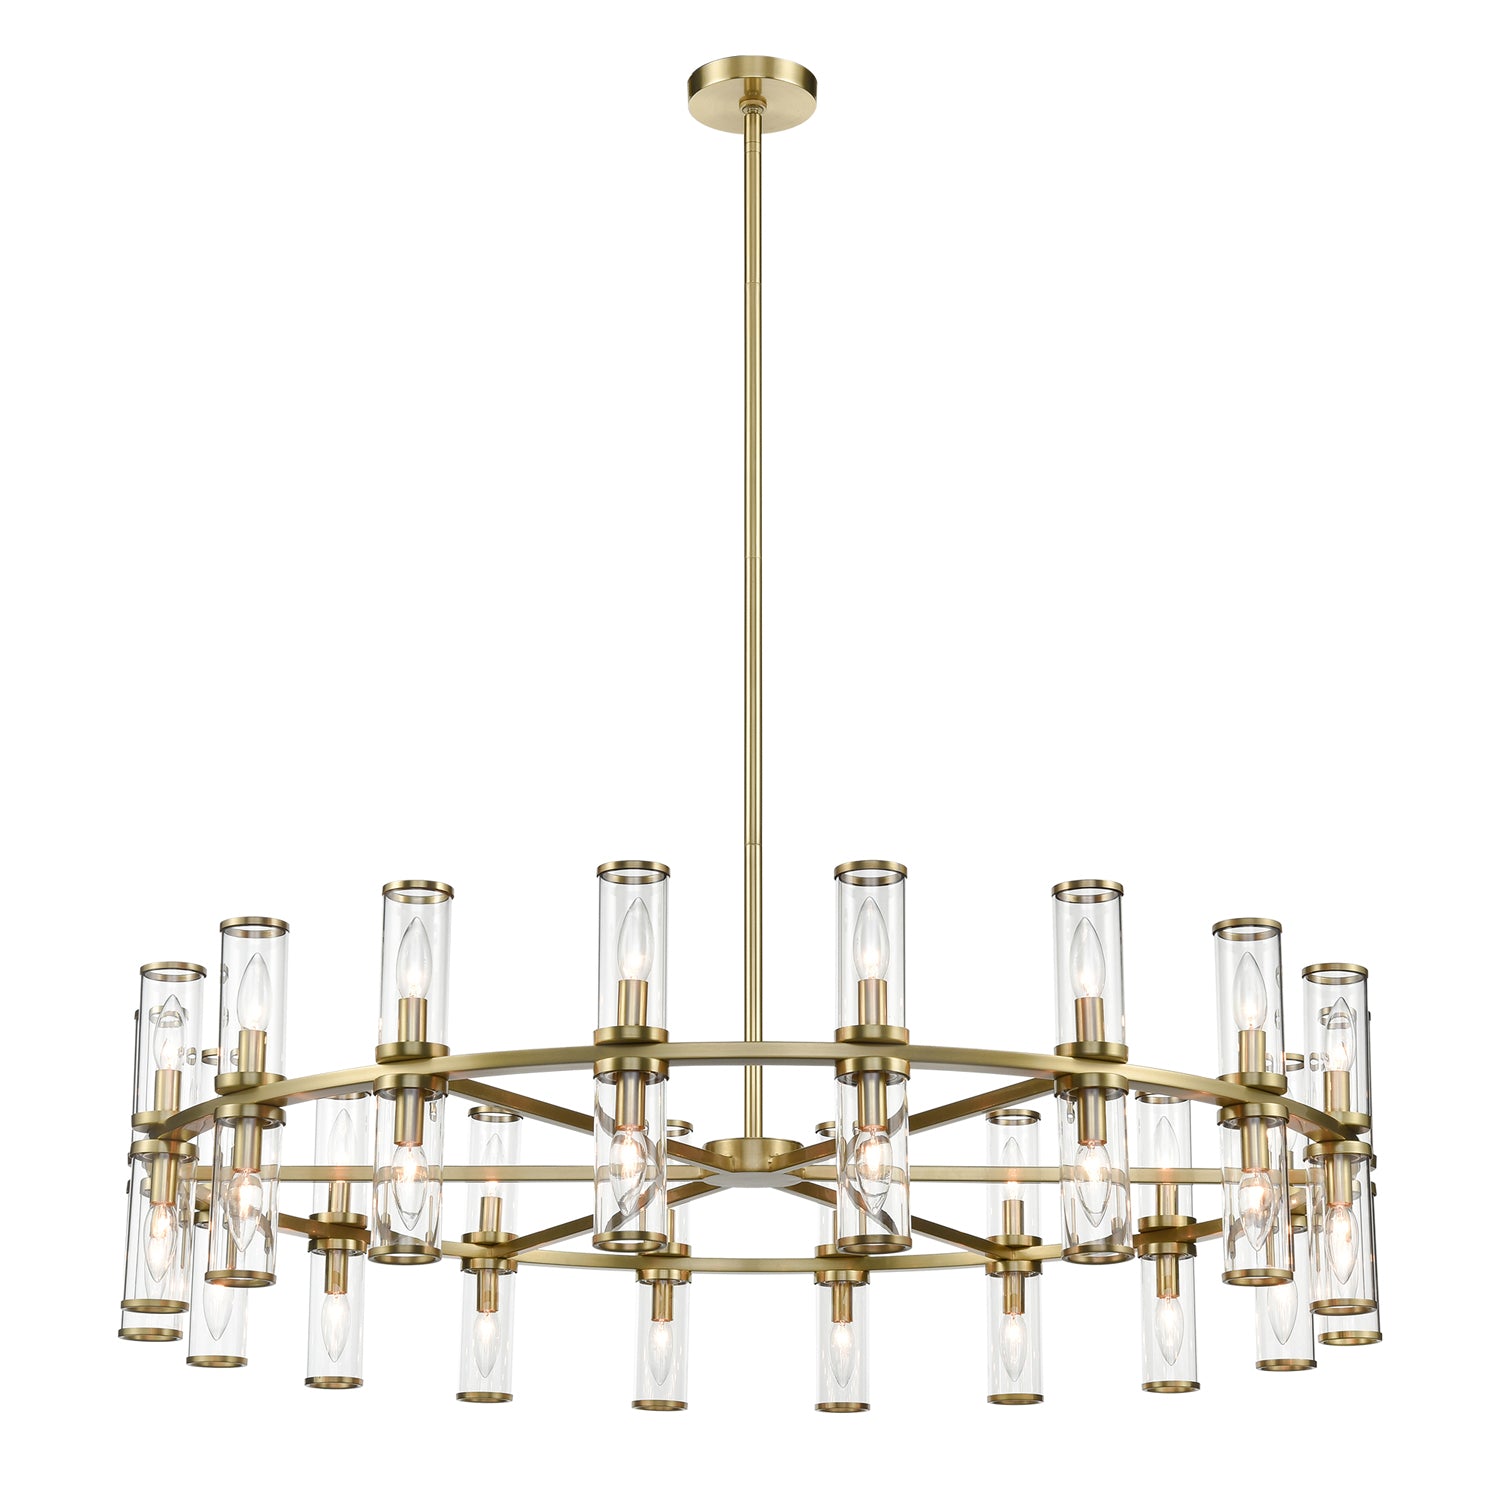 Alora Canada - 36 Light Chandelier - Revolve - Clear Glass/Natural Brass|Clear Glass/Polished Nickel|Clear Glass/Urban Bronze- Union Lighting Luminaires Decor